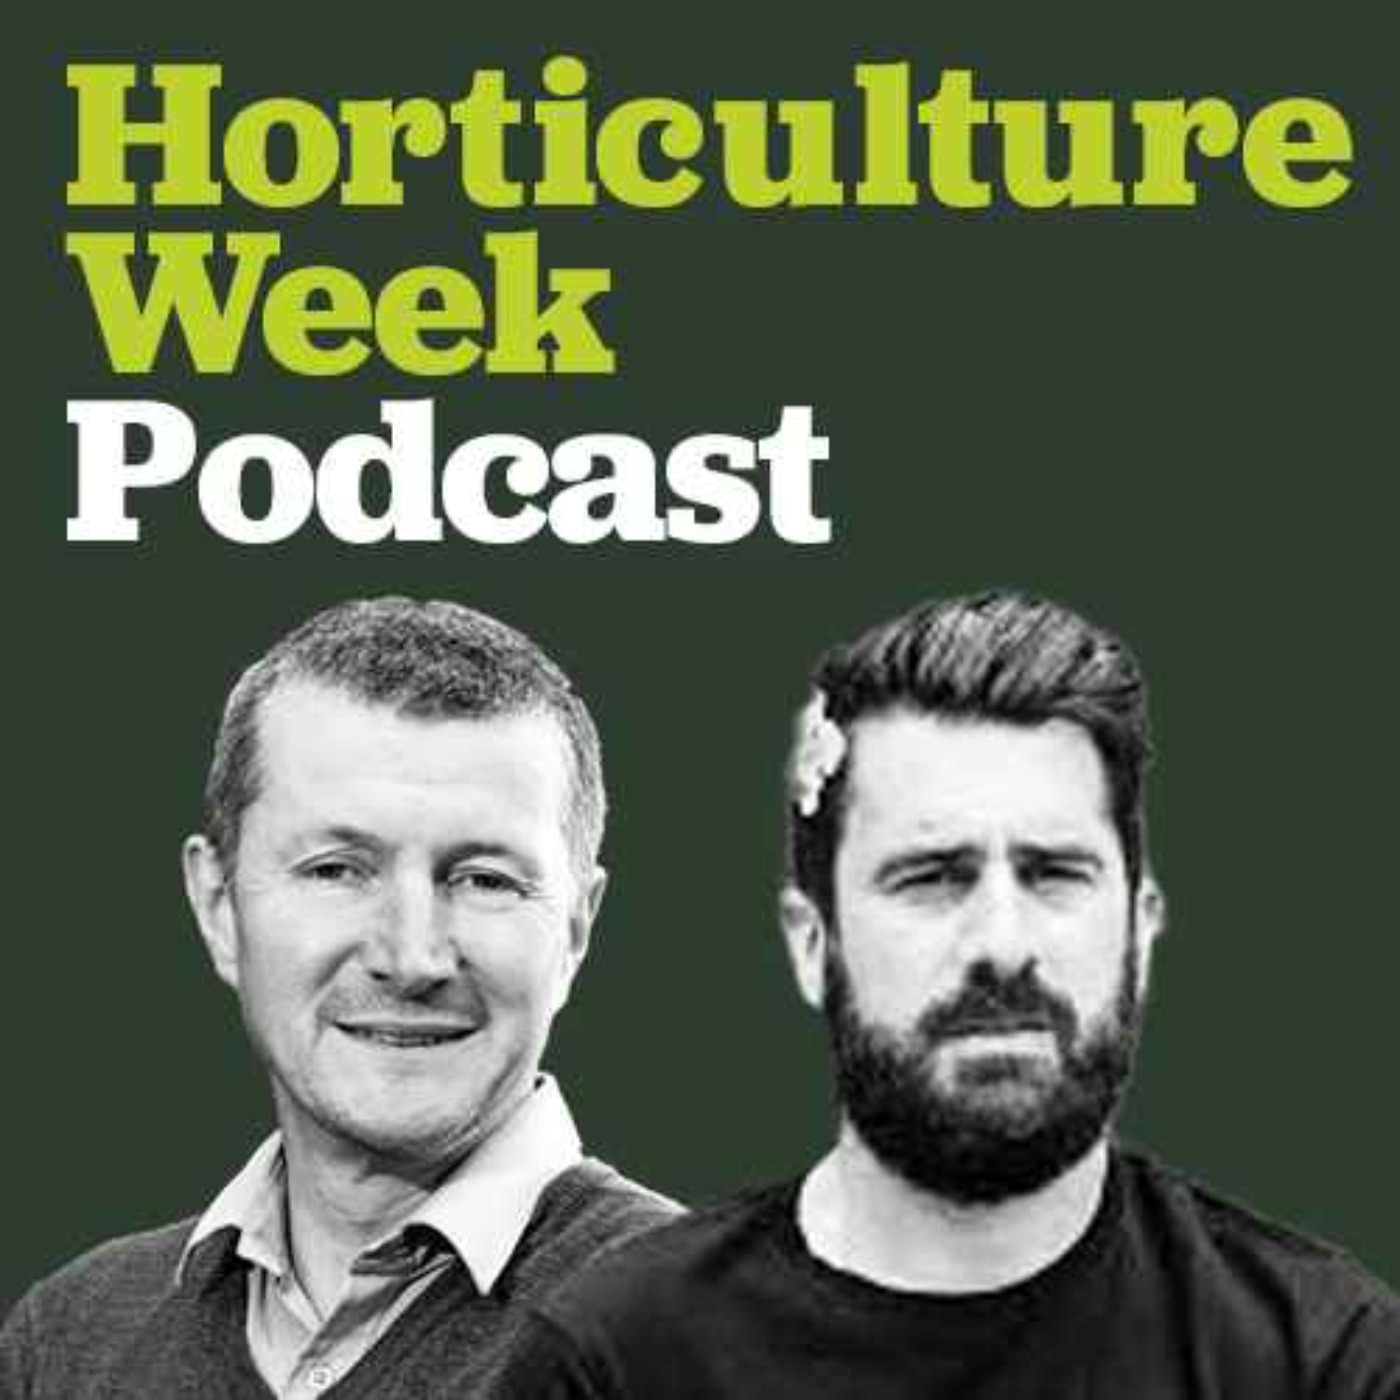 Mr Plant Geek on how to use new and old media to bridging the horticulture industry and new customers